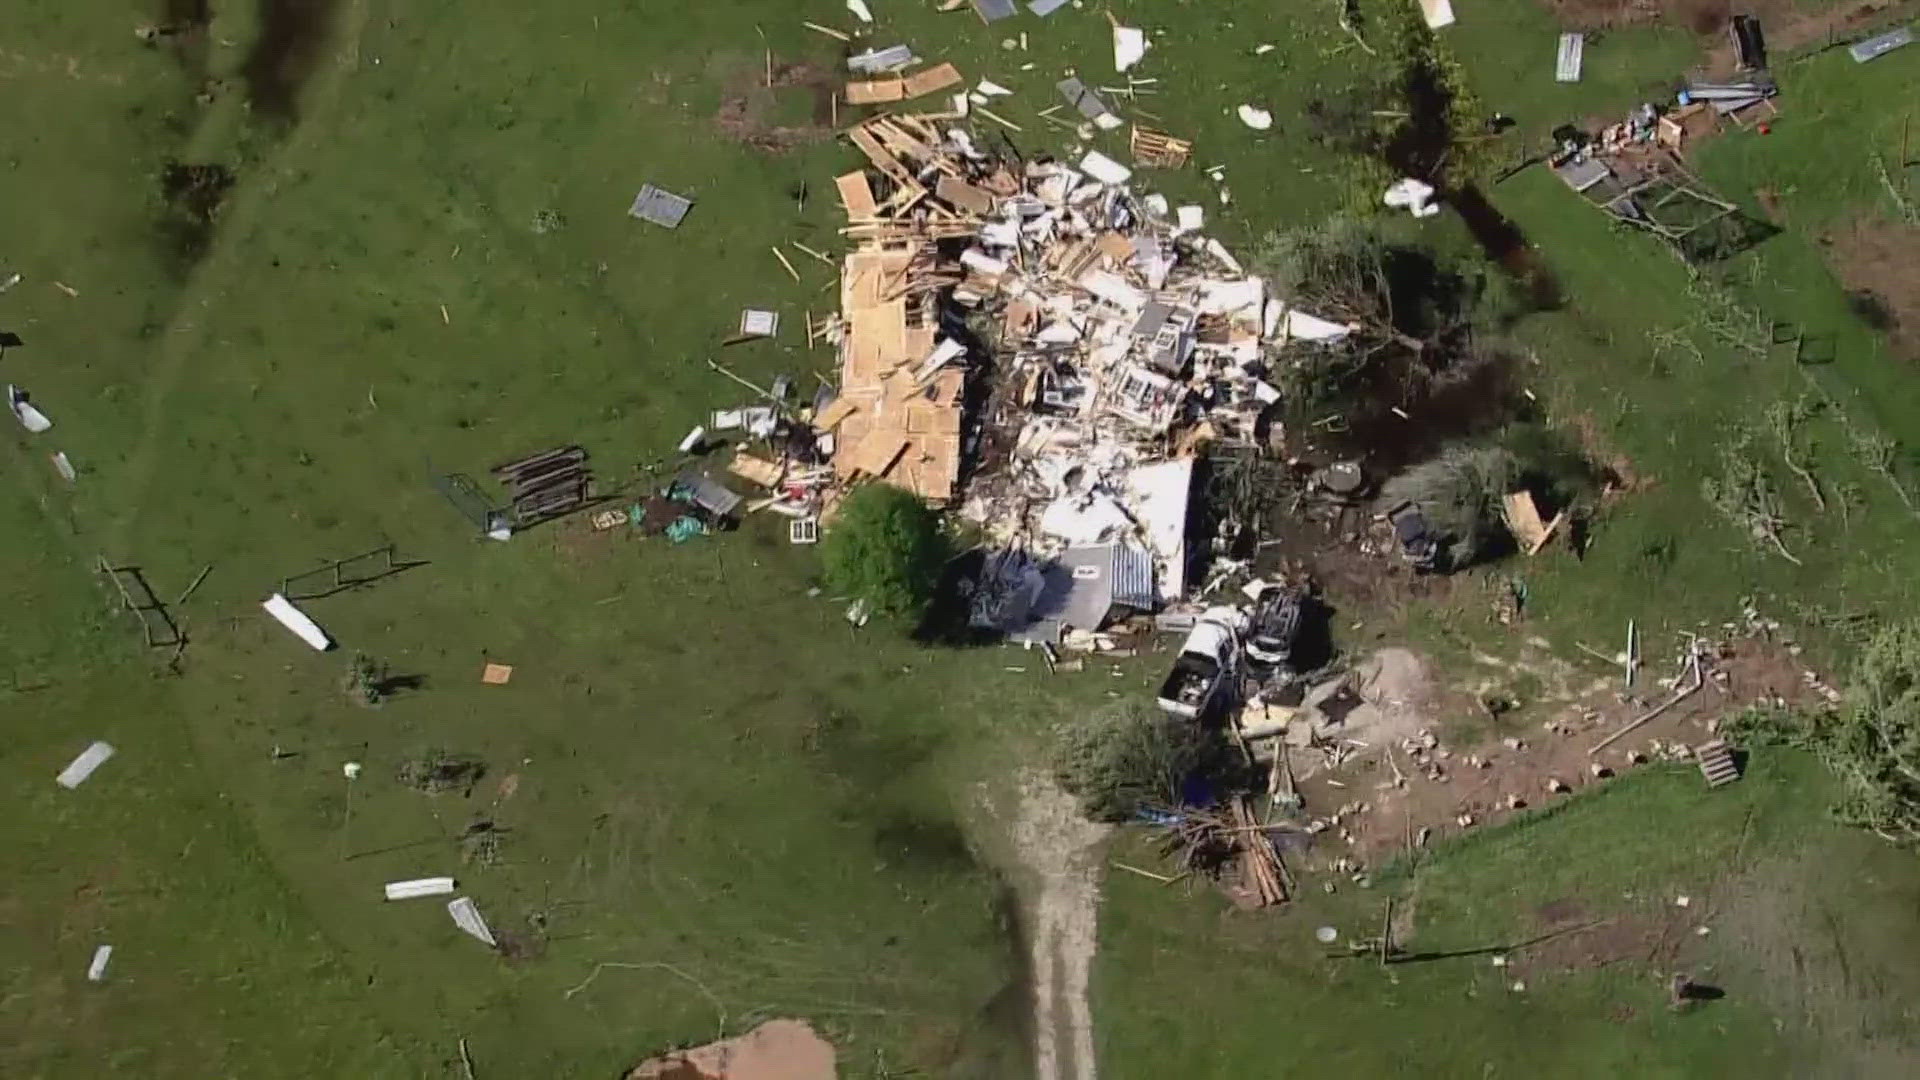 A Conroe police officer and his wife were injured when the tornado picked up and tossed their home like a cardboard box.